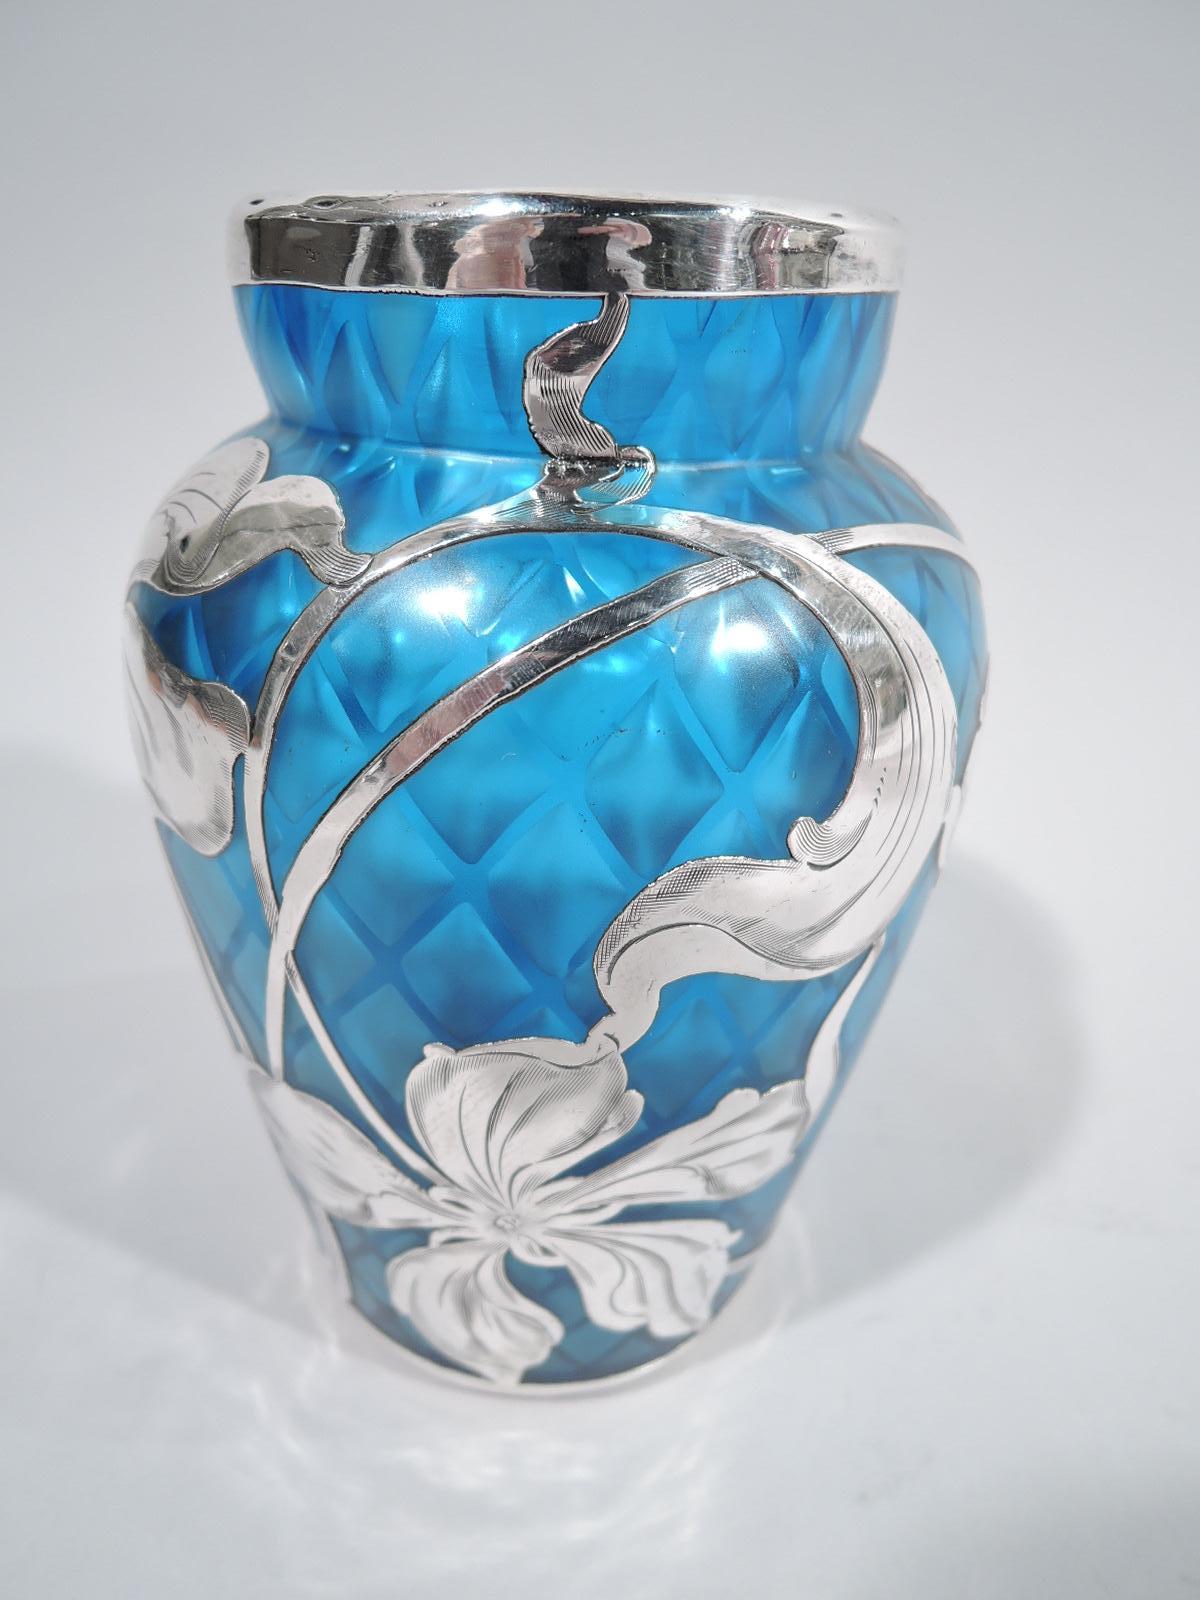 Beautiful turn-of-the-century Art Nouveau glass vase by historic maker Loetz with engraved silver overlay. Gently tapering sides and short inset neck. Loose and fluid floral overlay. An open and dynamic design with irregular petals and whiplash